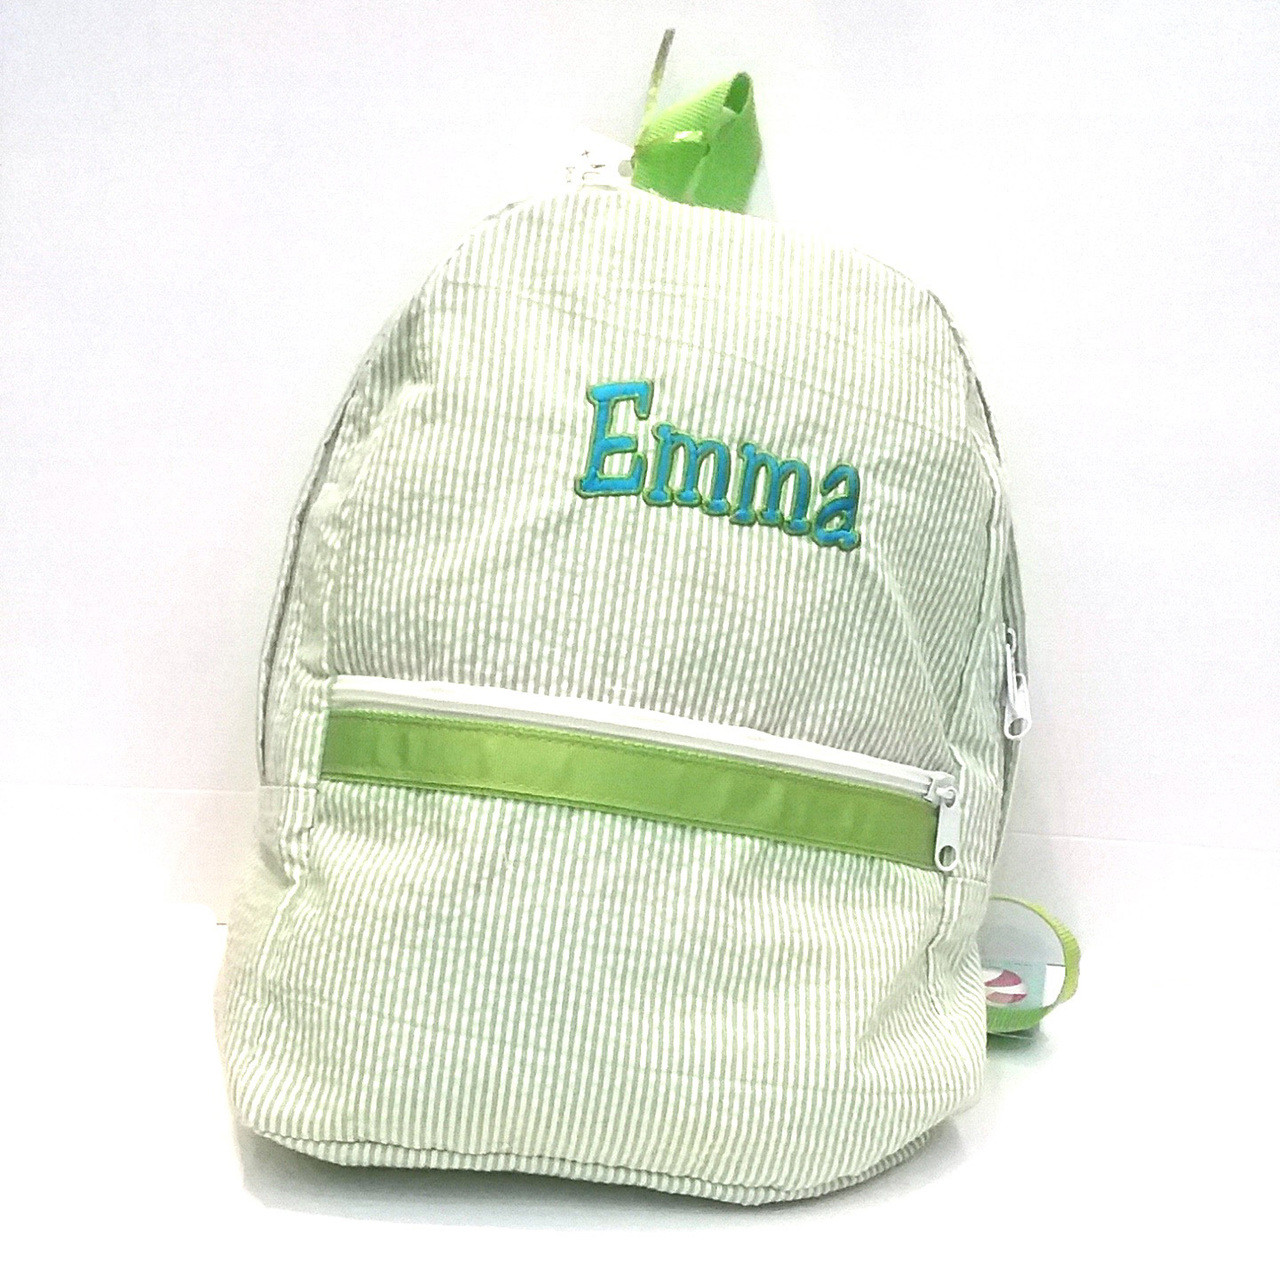 Toddler Backpack, Personalized Kids Backpack With Name, Seersucker